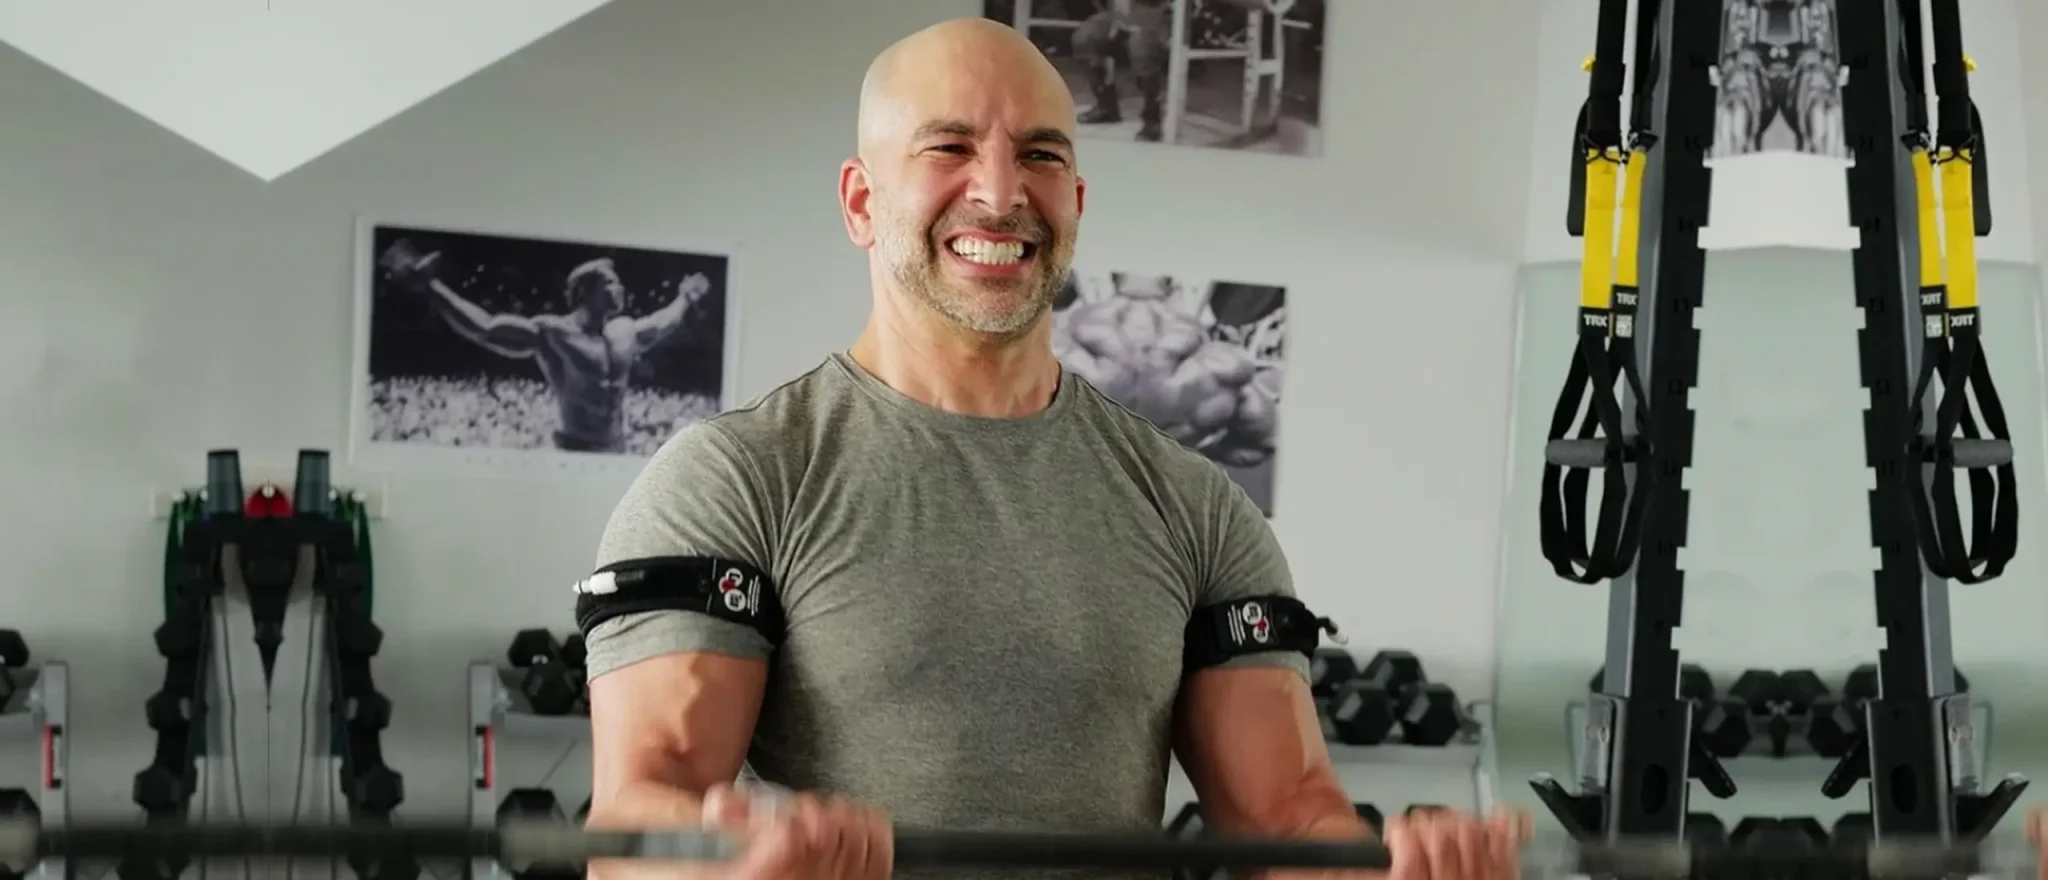 Want to Be a Kick-Ass 100-Year-Old? Steal Peter Attia’s Workout Routine, Stat